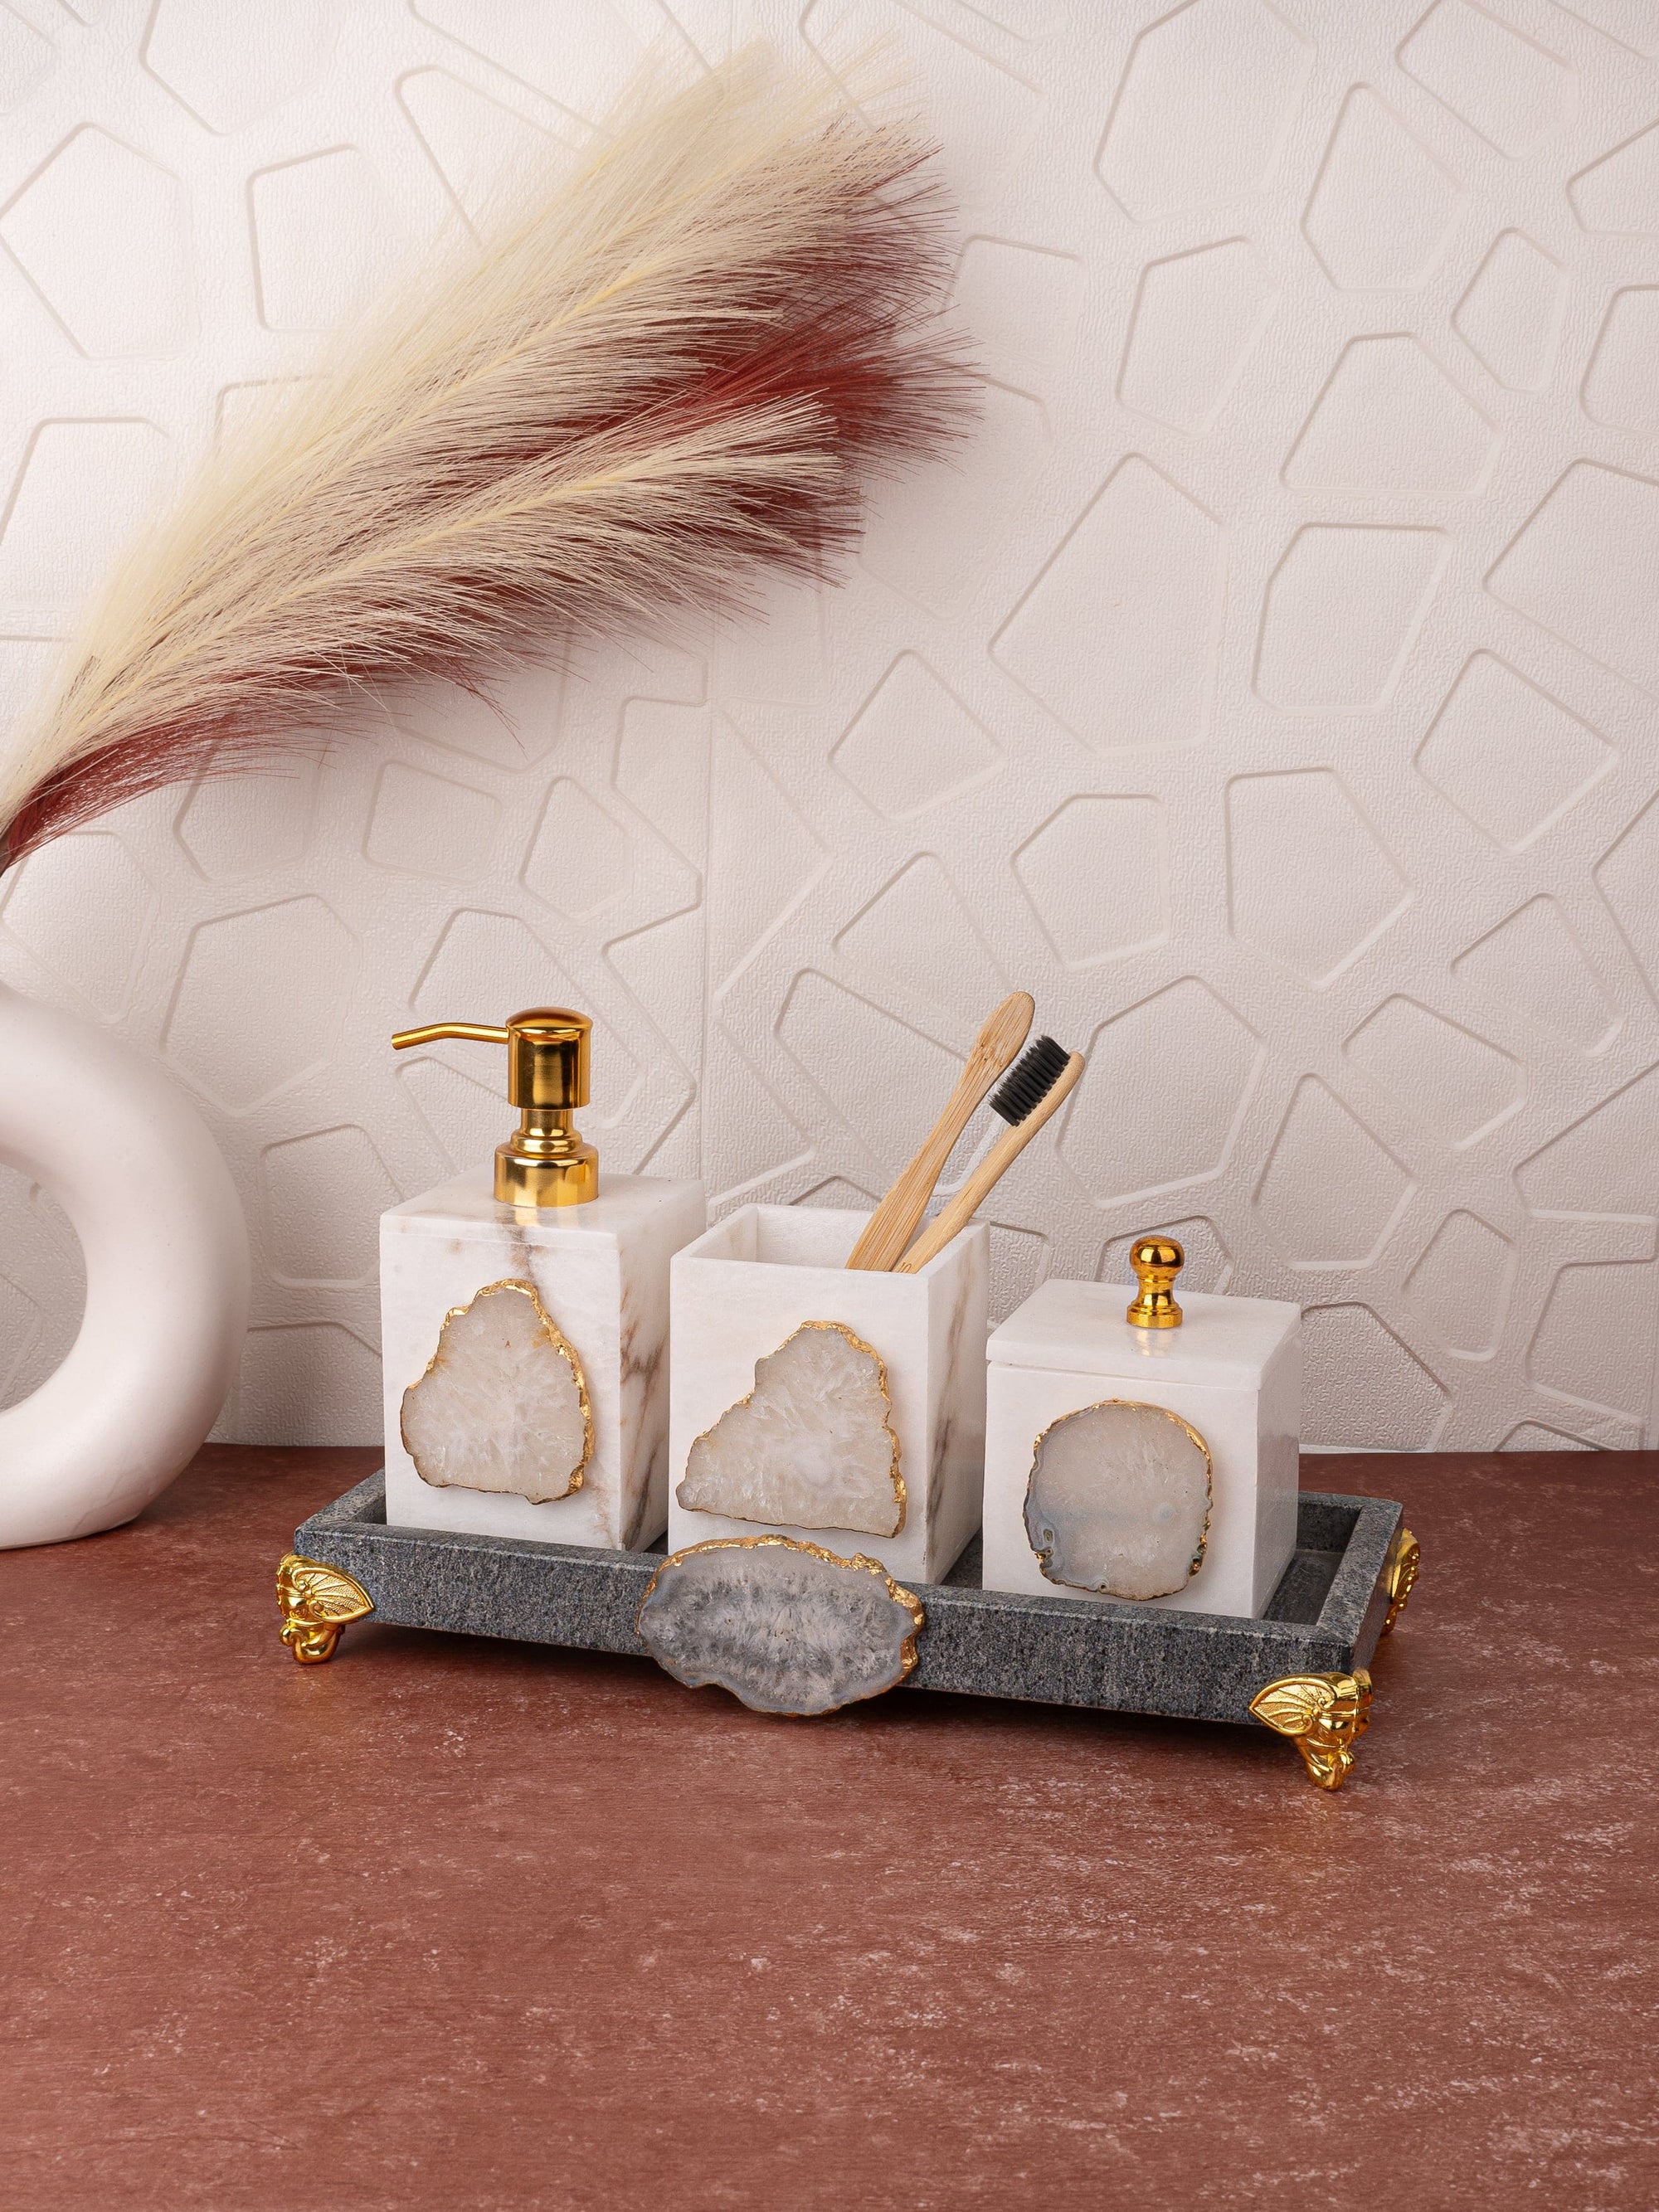 4 Pieces Bathroom Accessories Set with Agate Stone Decor